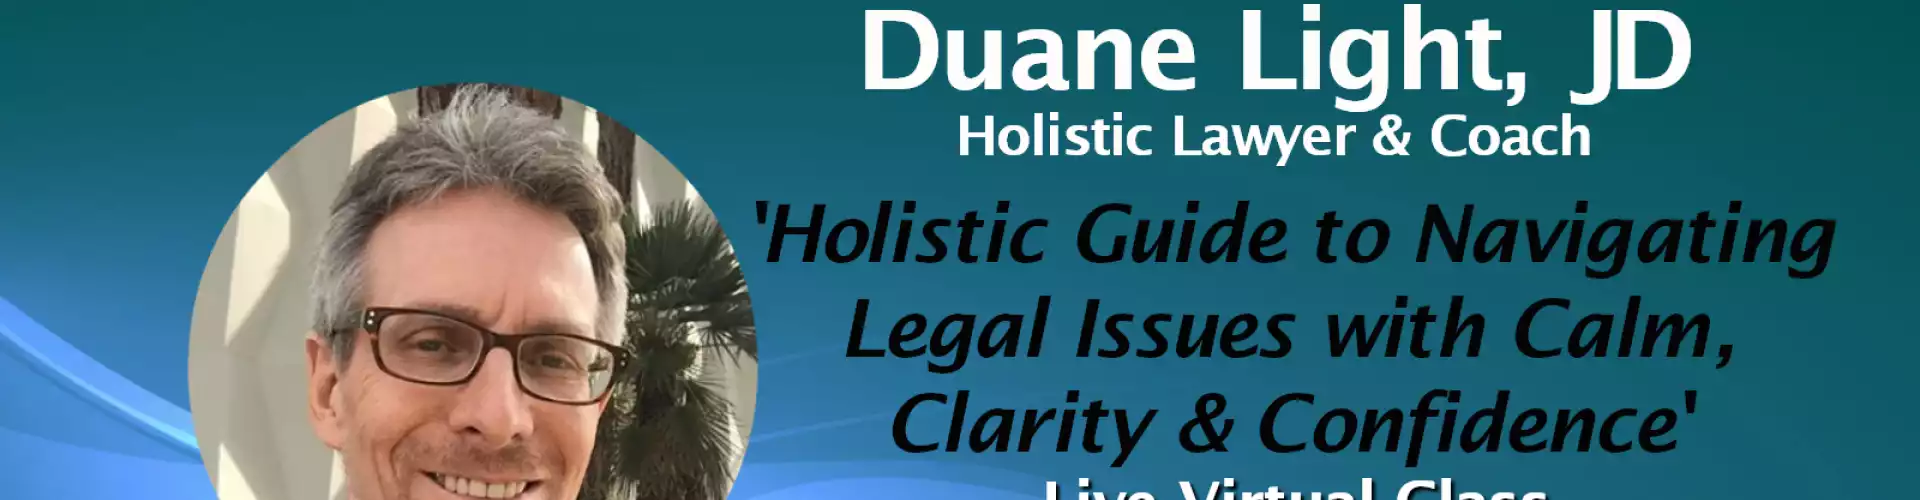 Holistic Guide to Navigating Legal Issues with Calm, Clarity & Confidence with WU Expert Duane Light